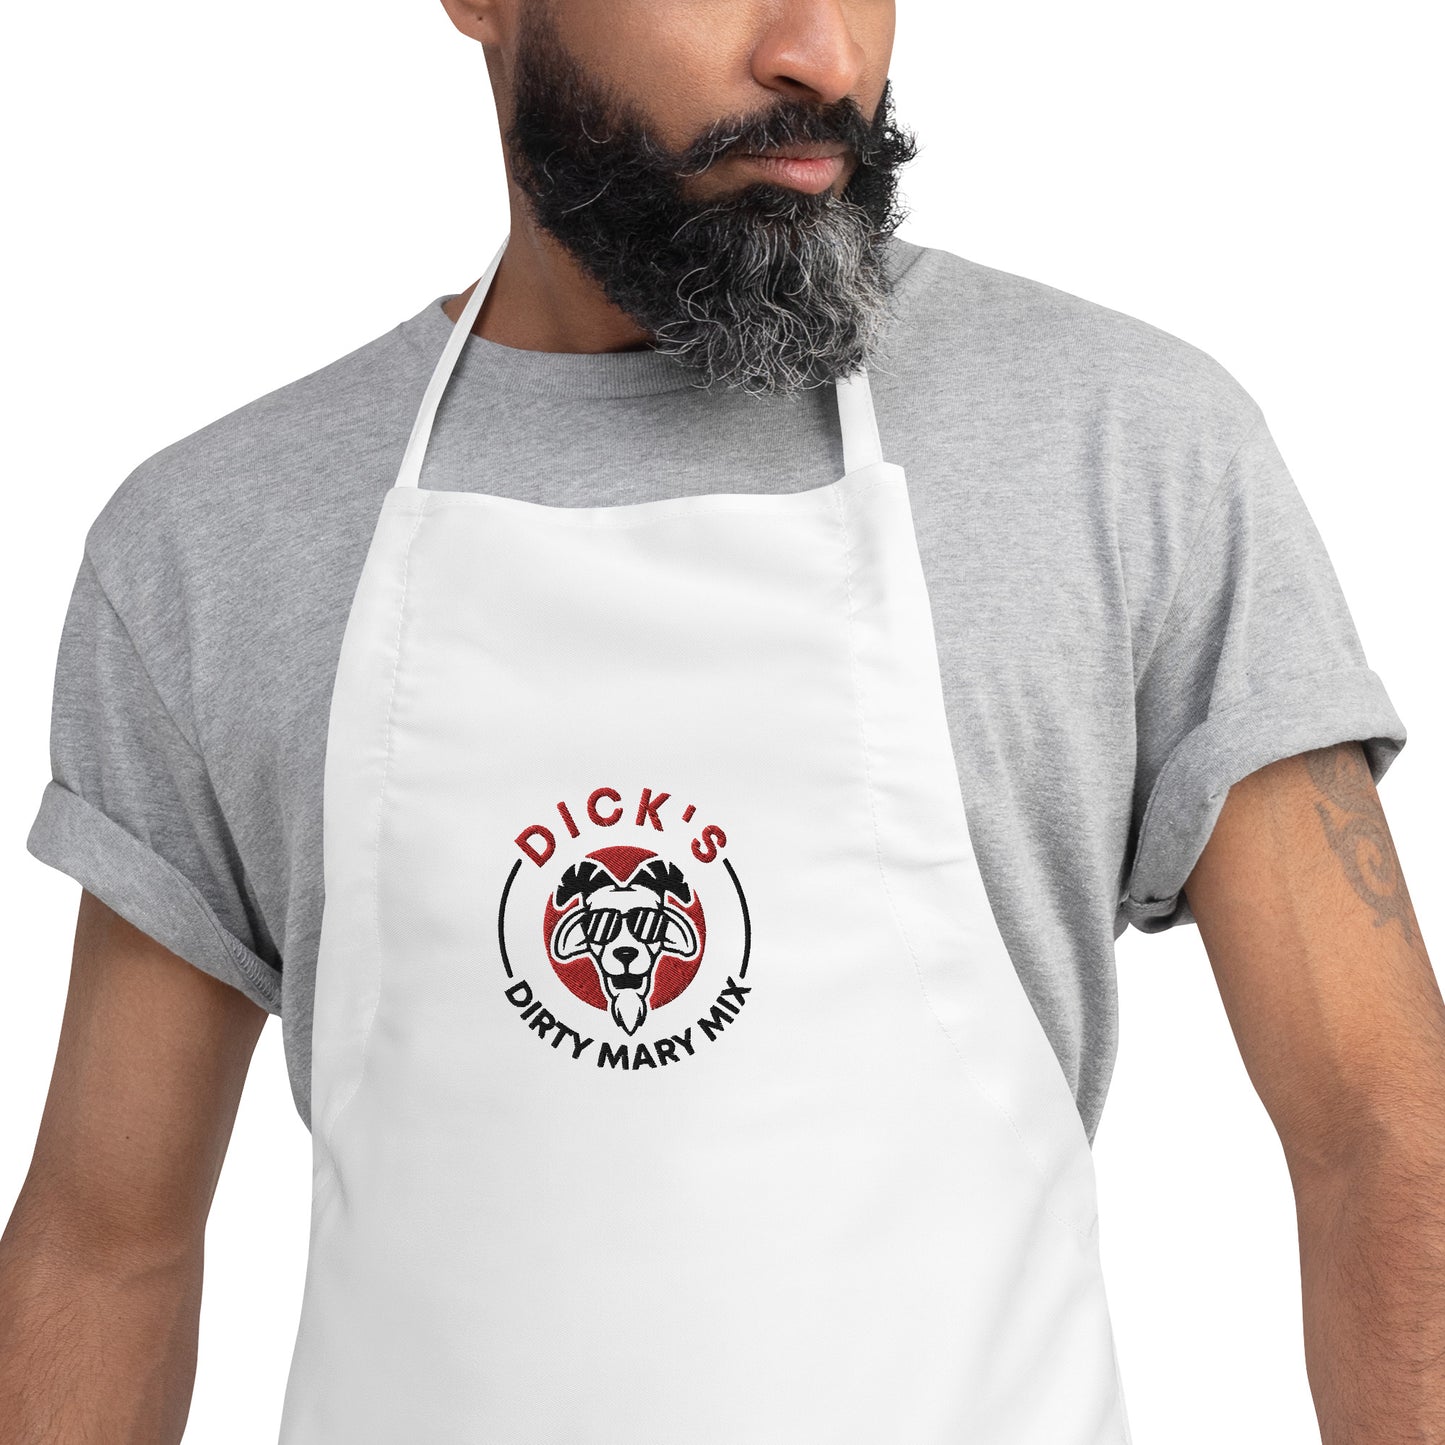 Dick's Dirty Mary Mix - Embroidered Apron